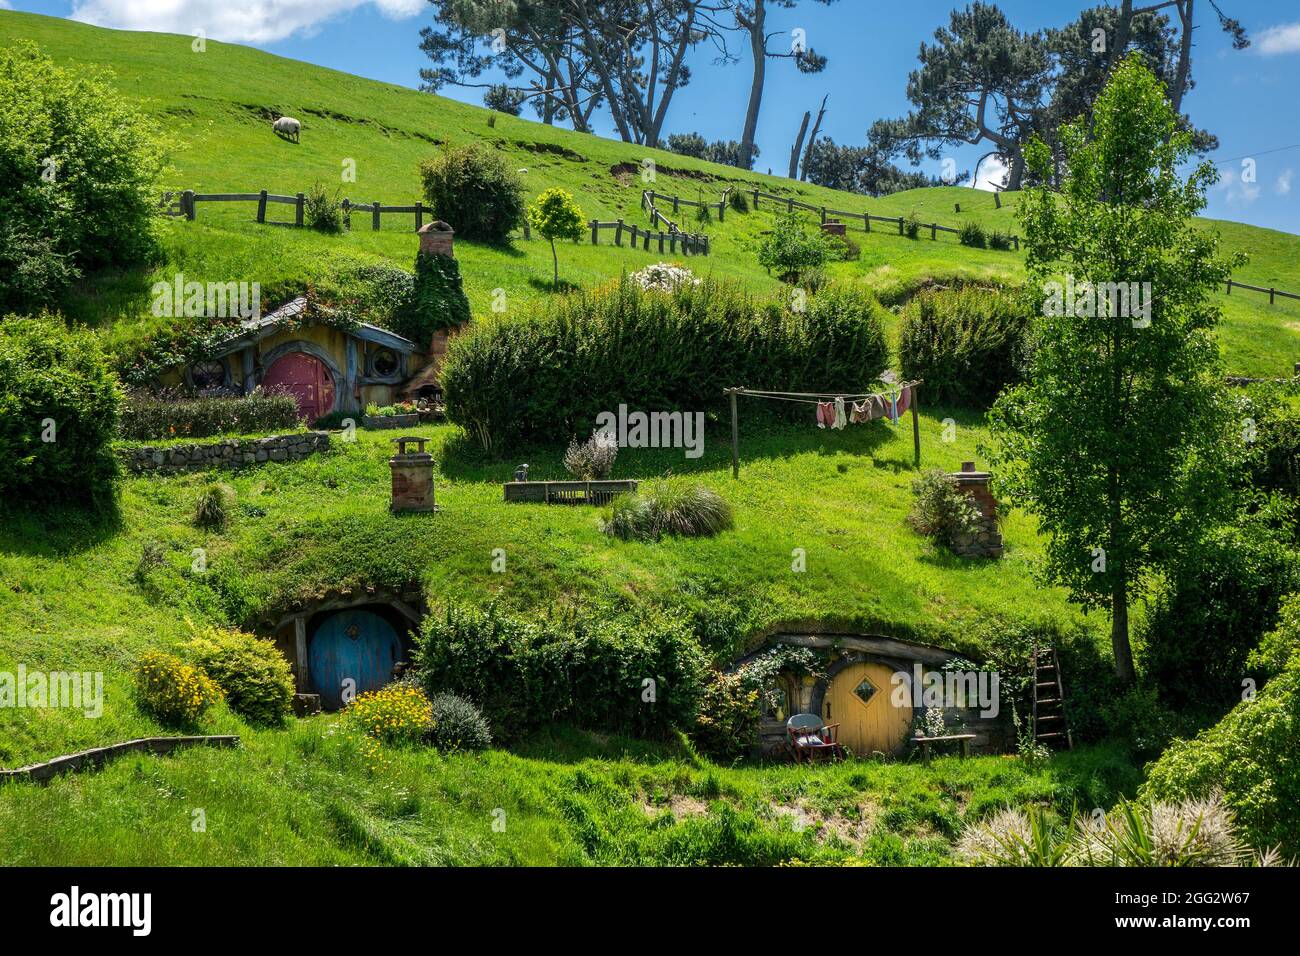 Hobbit Holes Homes On The Hobbiton Movie Set For The Lord Of The Rings Movie Trilogy In Matamata New Zealand A Popular Tourist Attraction Stock Photo